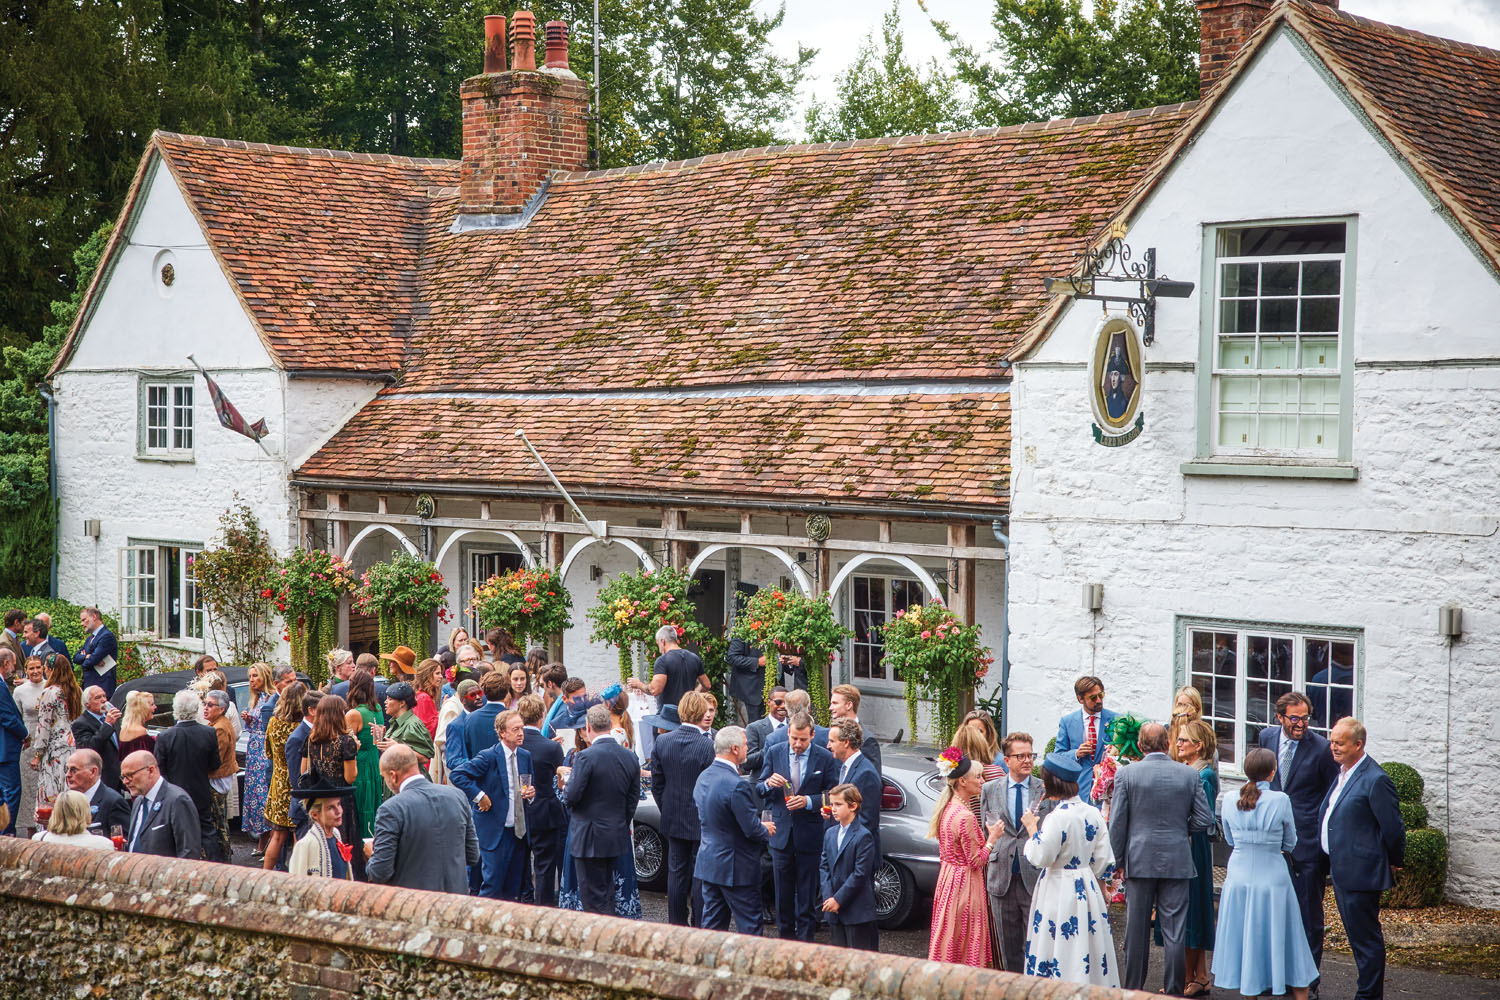 The celebration continued across the lane from the church at the Lord Nelson Pub, where guests congregated before the luncheon.